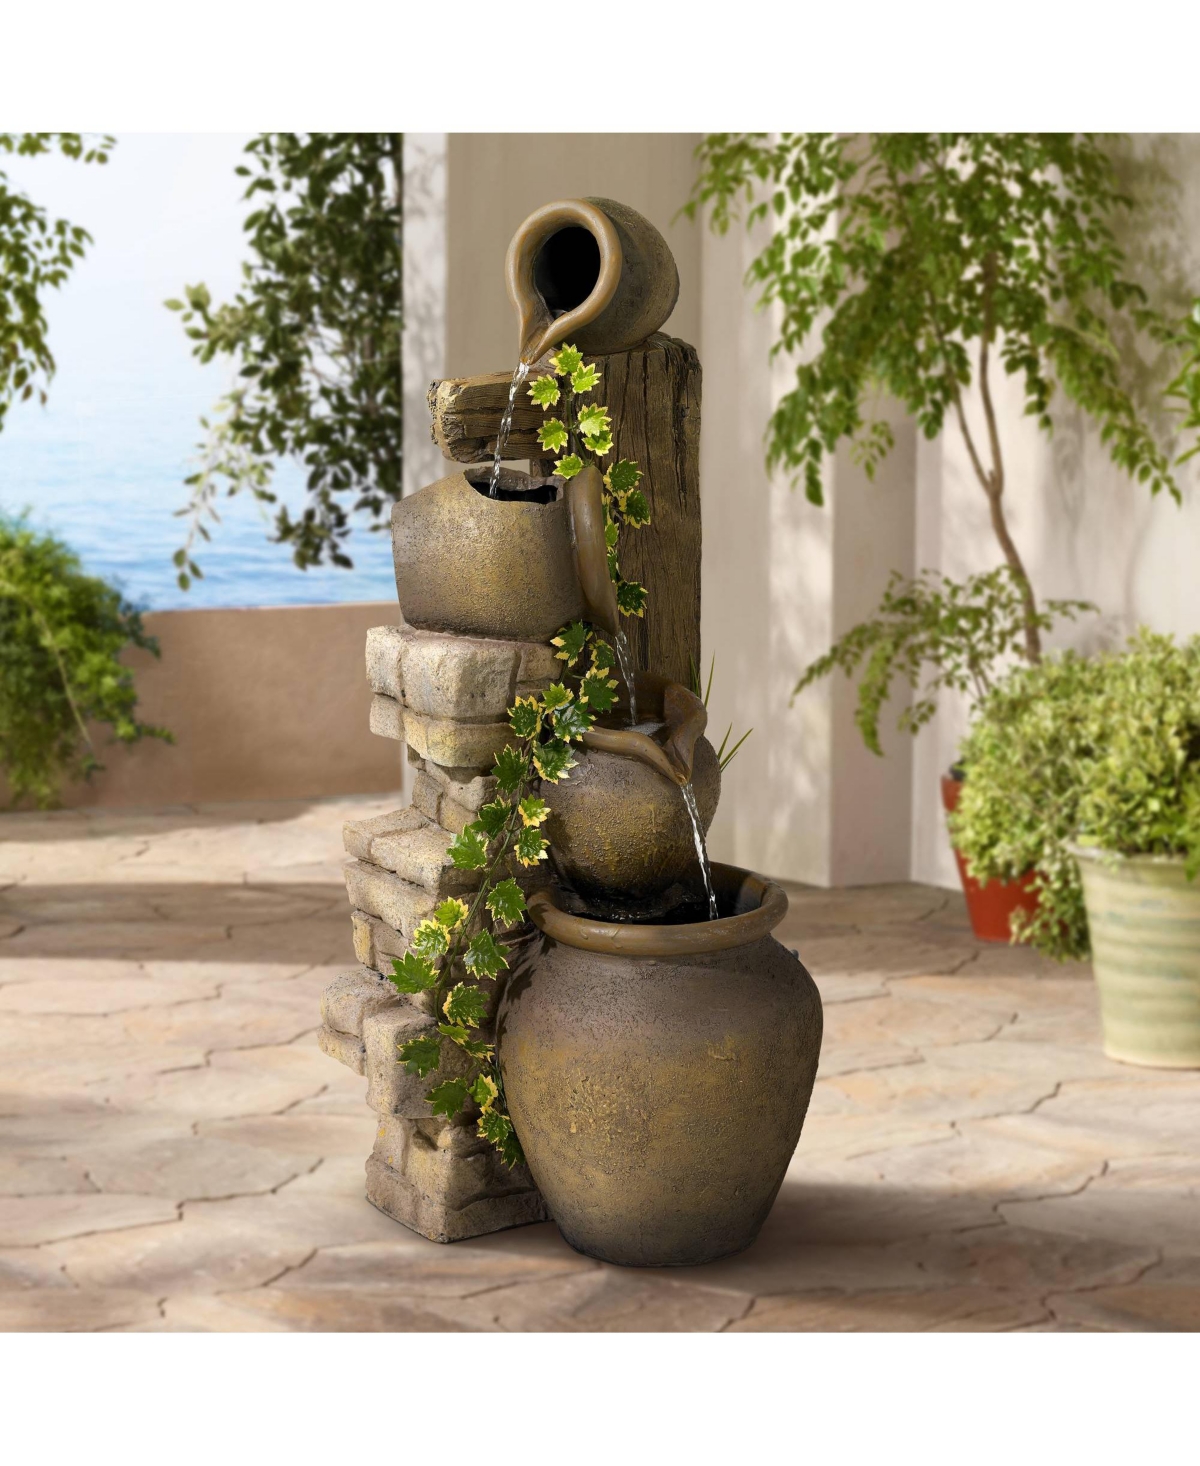 Cascading Rustic Outdoor Floor Three Jugs Fountain and Waterfalls 33" High Decor for Garden Patio Backyard Deck Home Lawn Porch House Living Room Rela